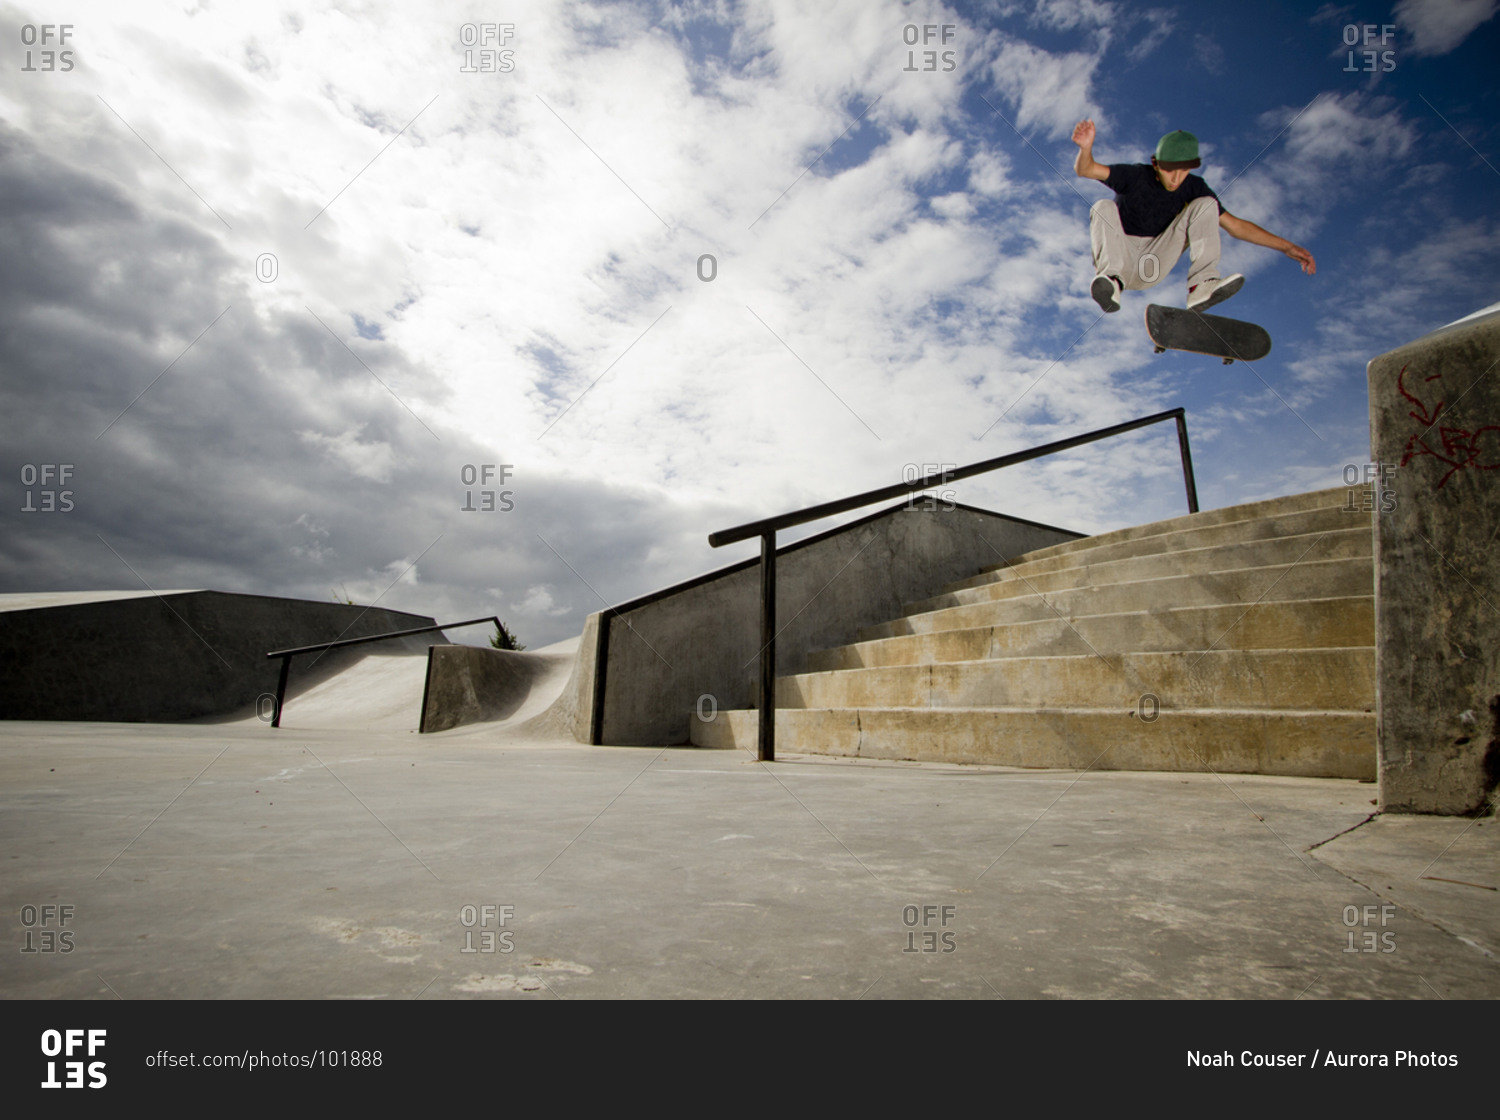 A young skateboarder, kickflips his skateboard over a 7-stair gap at the skatepark in Whitefish, Montana.